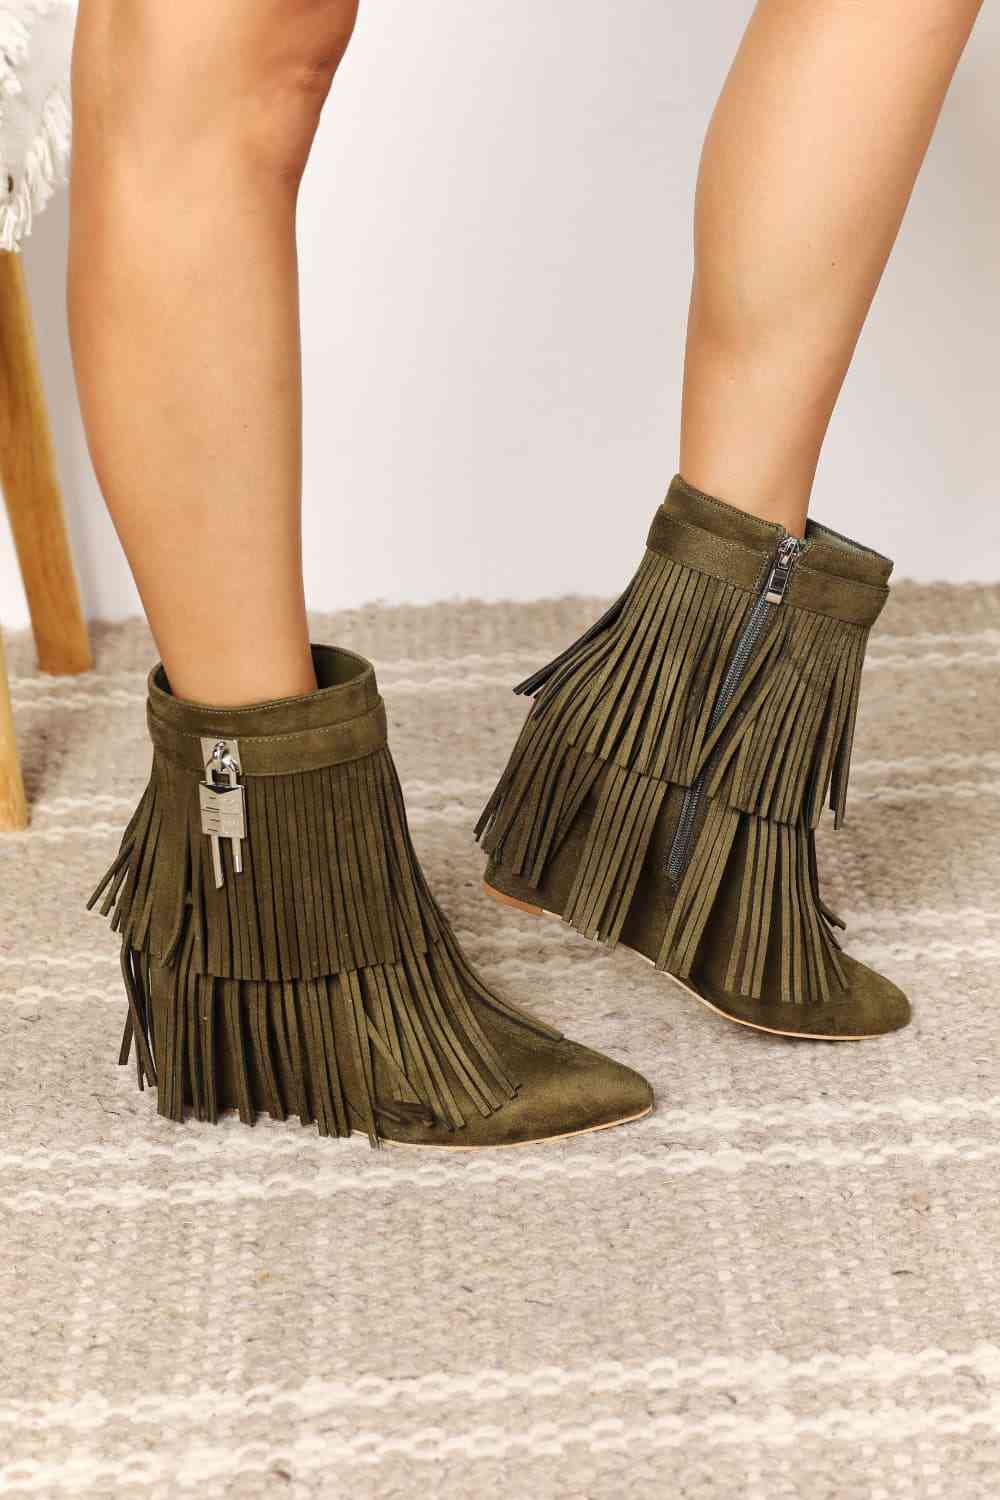 "An image featuring Legend Women's Tassel Wedge Heel Ankle Booties in [color]. The stylish booties showcase a fashionable wedge heel and are adorned with tassel details. A trendy and versatile choice for adding flair to any outfit, these ankle booties effortlessly combine fashion and comfort."